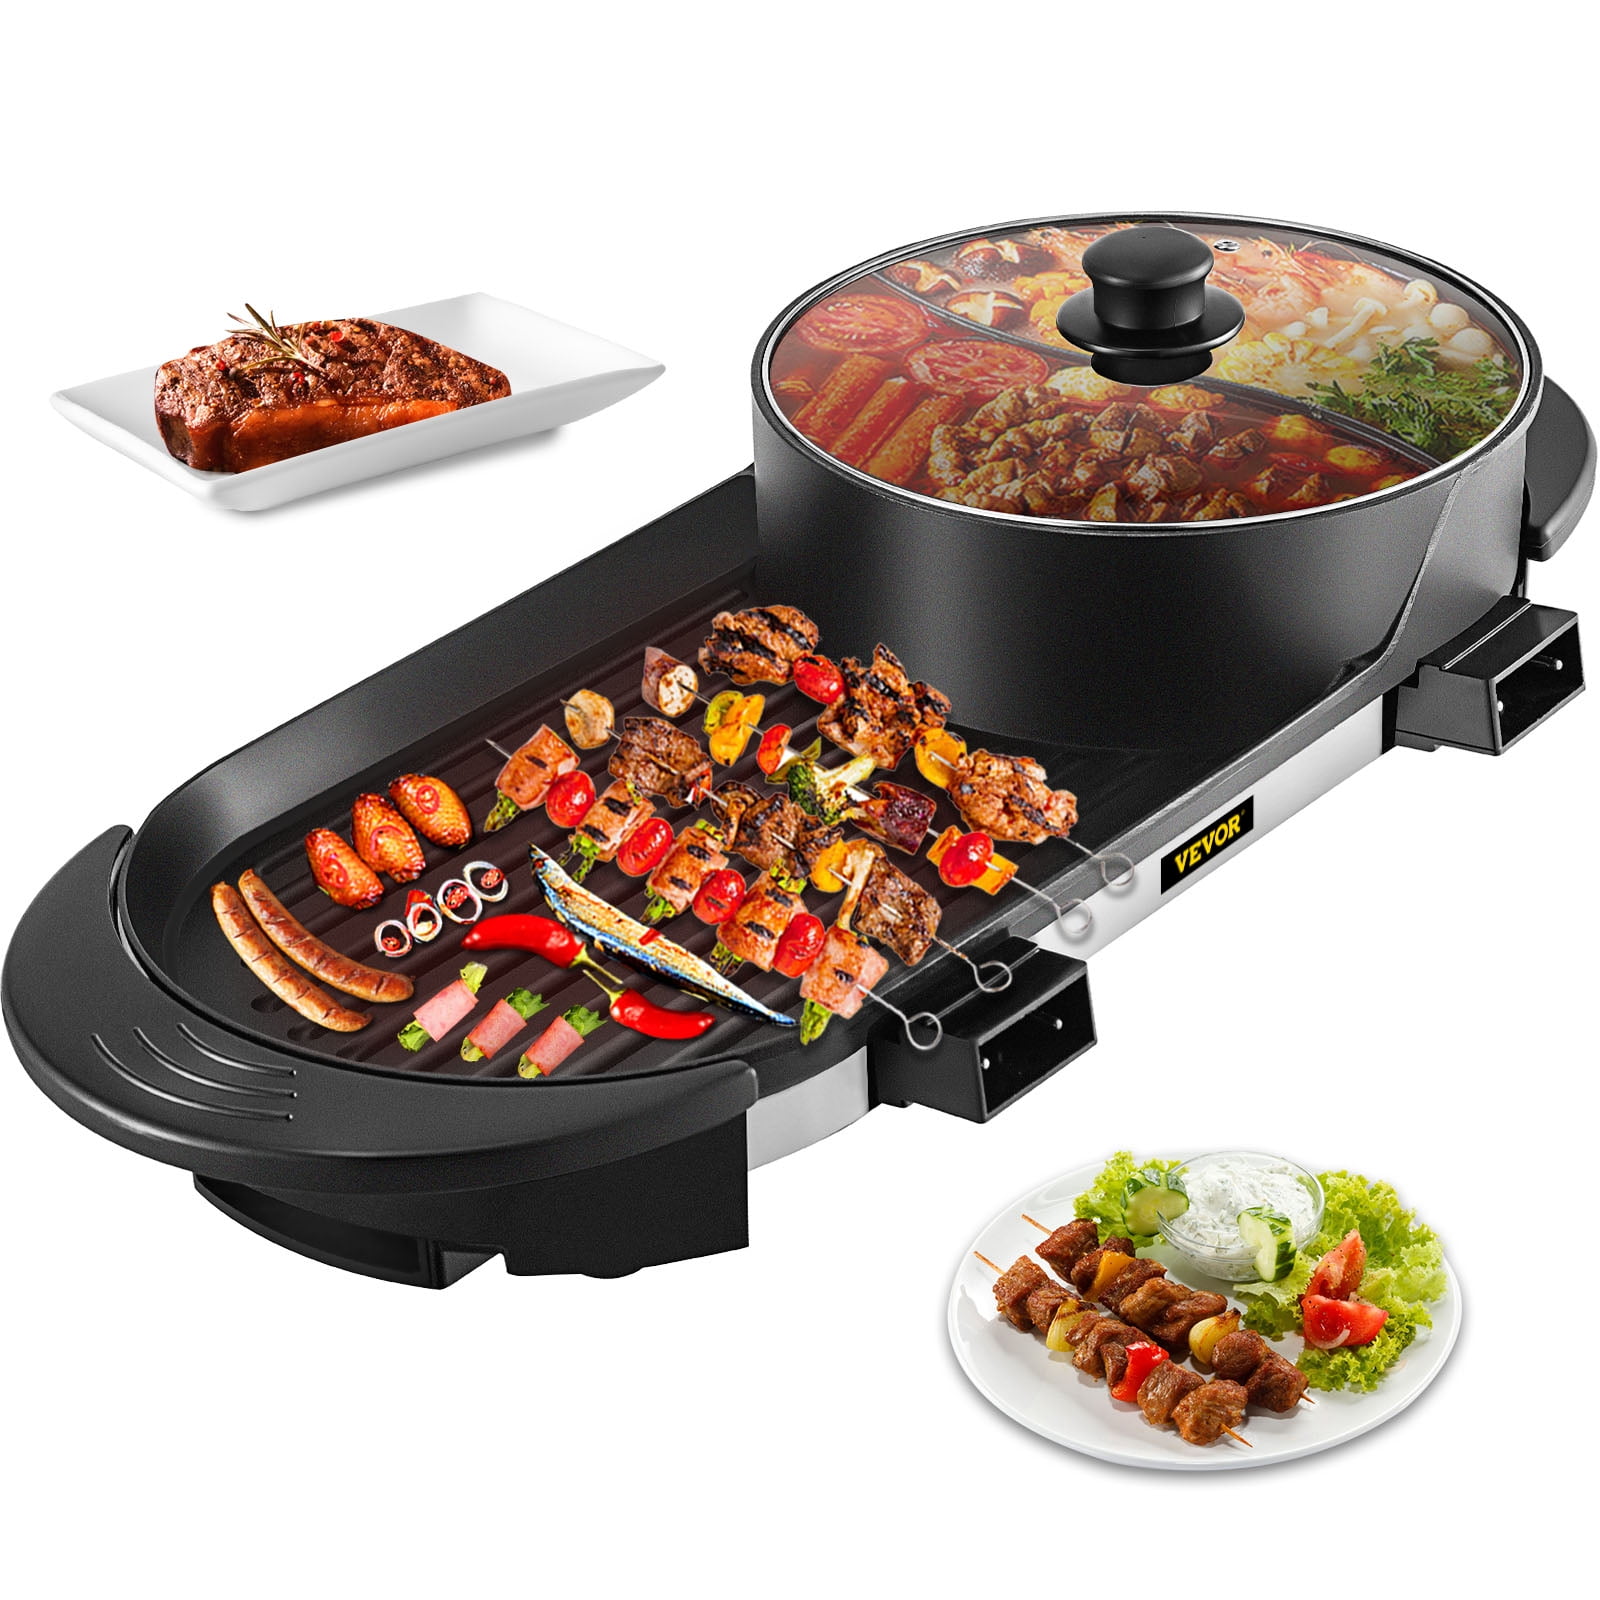 YSE 220V Outdoor Charbroiler Electric Barbecue Oven Smokeless BBQ Grill Machine 